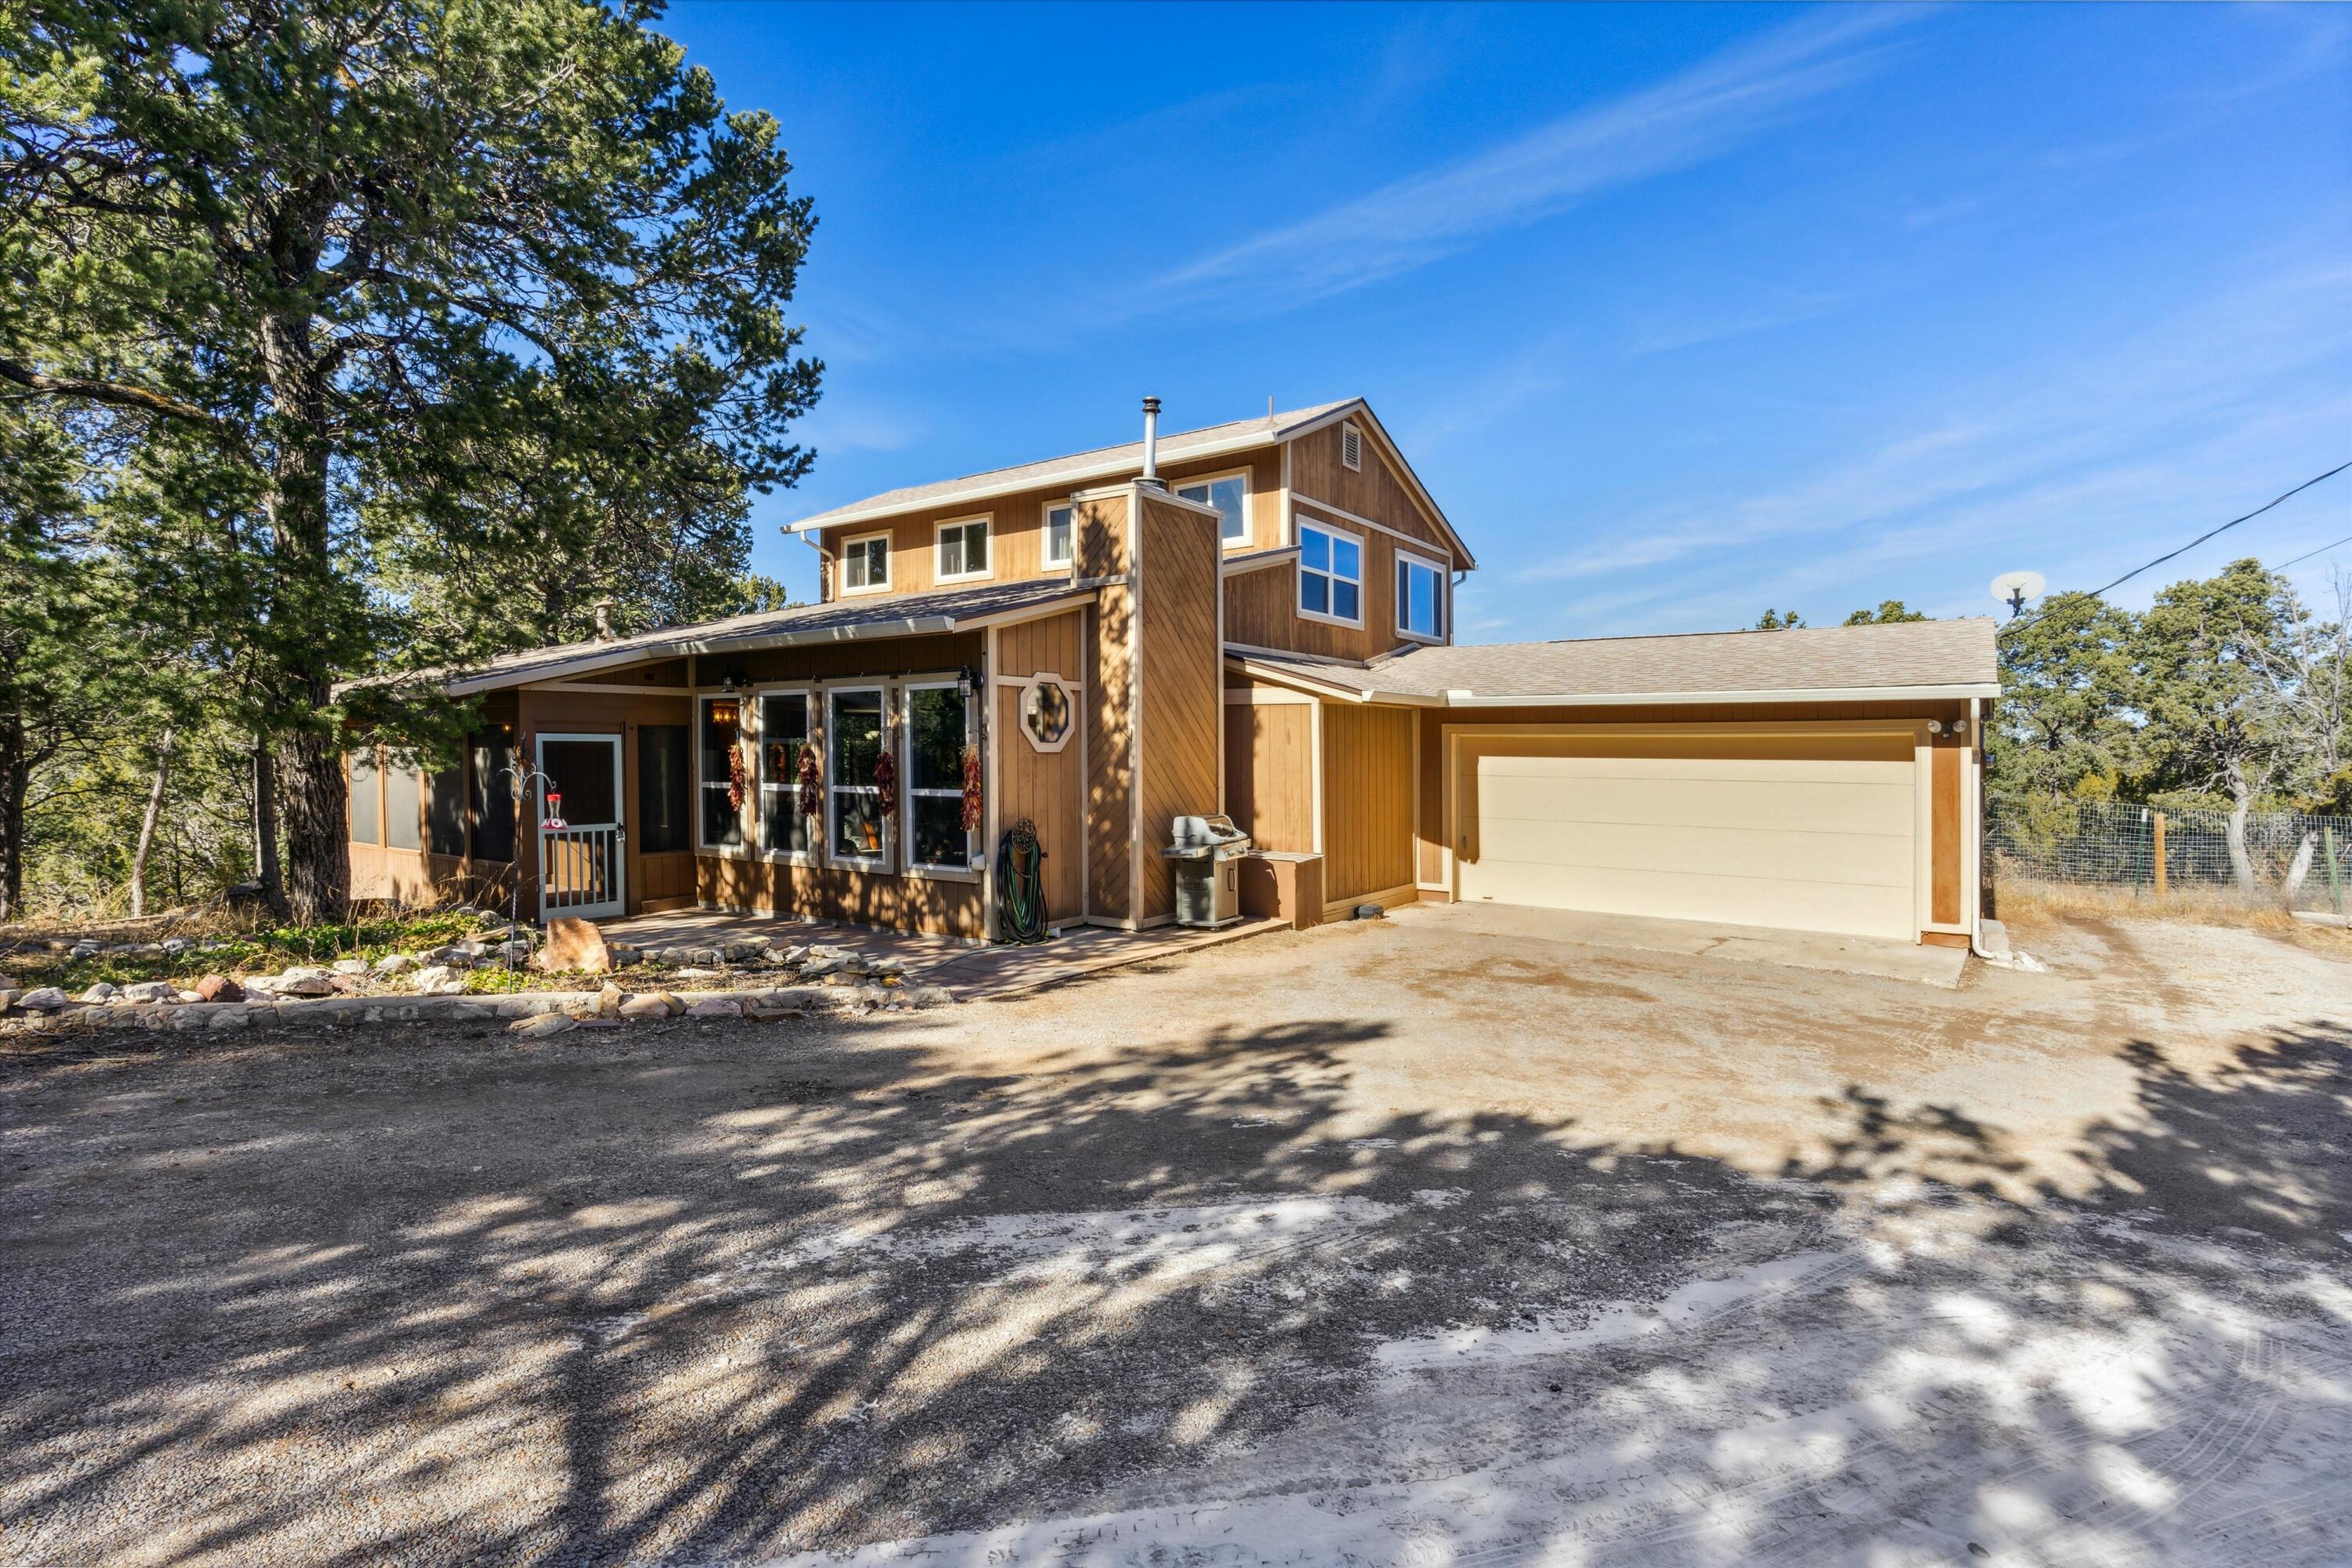 Welcome to this charming mountain retreat in Tijeras. This home features numerous updates including a new roof in 2019, remodeled bathrooms, new vinyl windows and a newer pellet stove.  Other features include brick floors, wood ceilings, and a wonderful open floor plan.  Relax on the front porch, or the master bedroom deck.  Large shed is perfect for all the extra things you need to store.  This home has been well cared for and is super clean, come see it today!